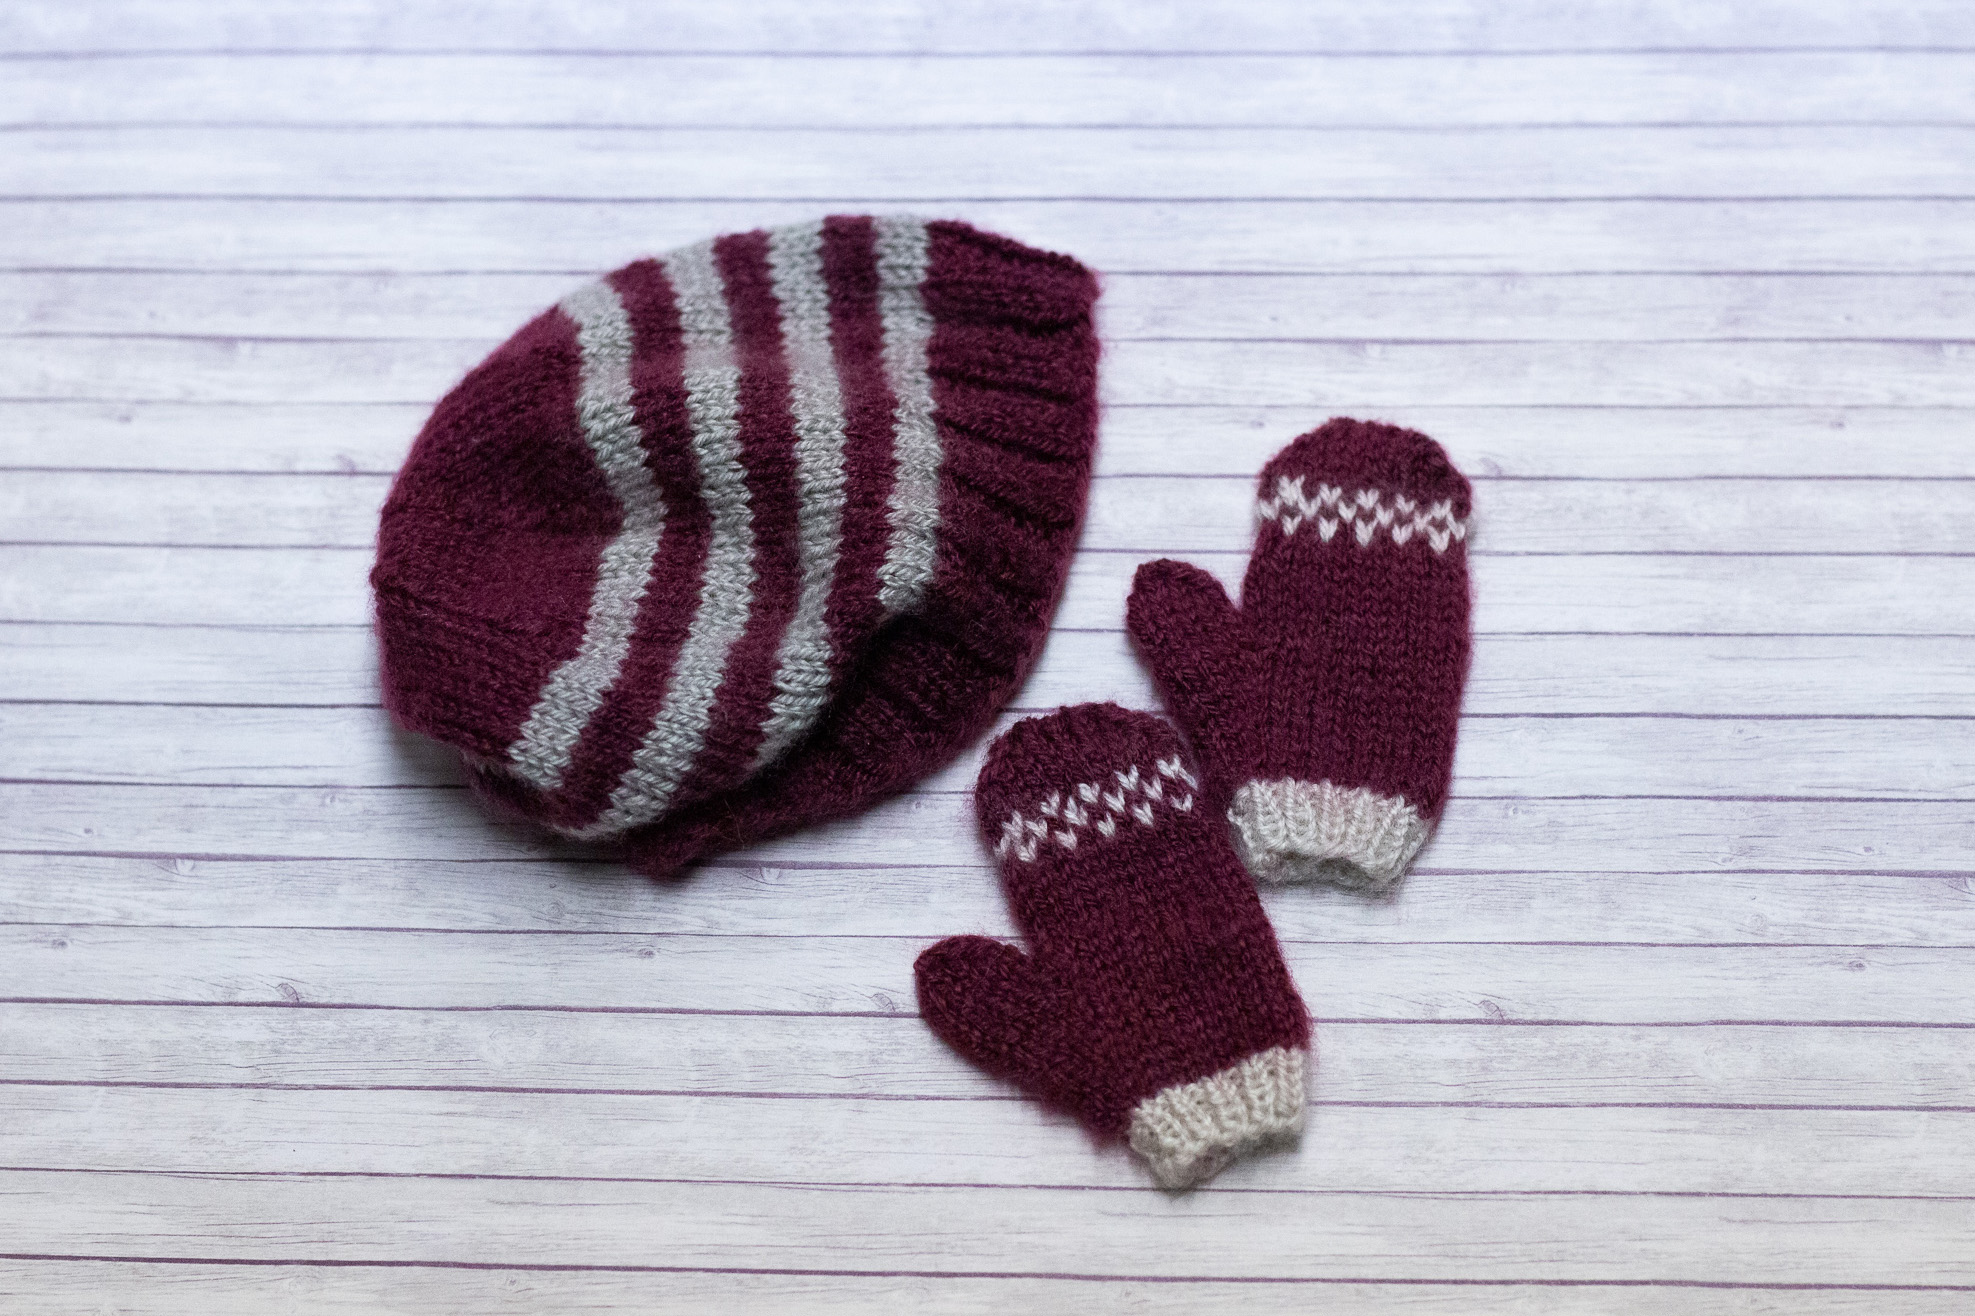 Striped hat with matching mittens.